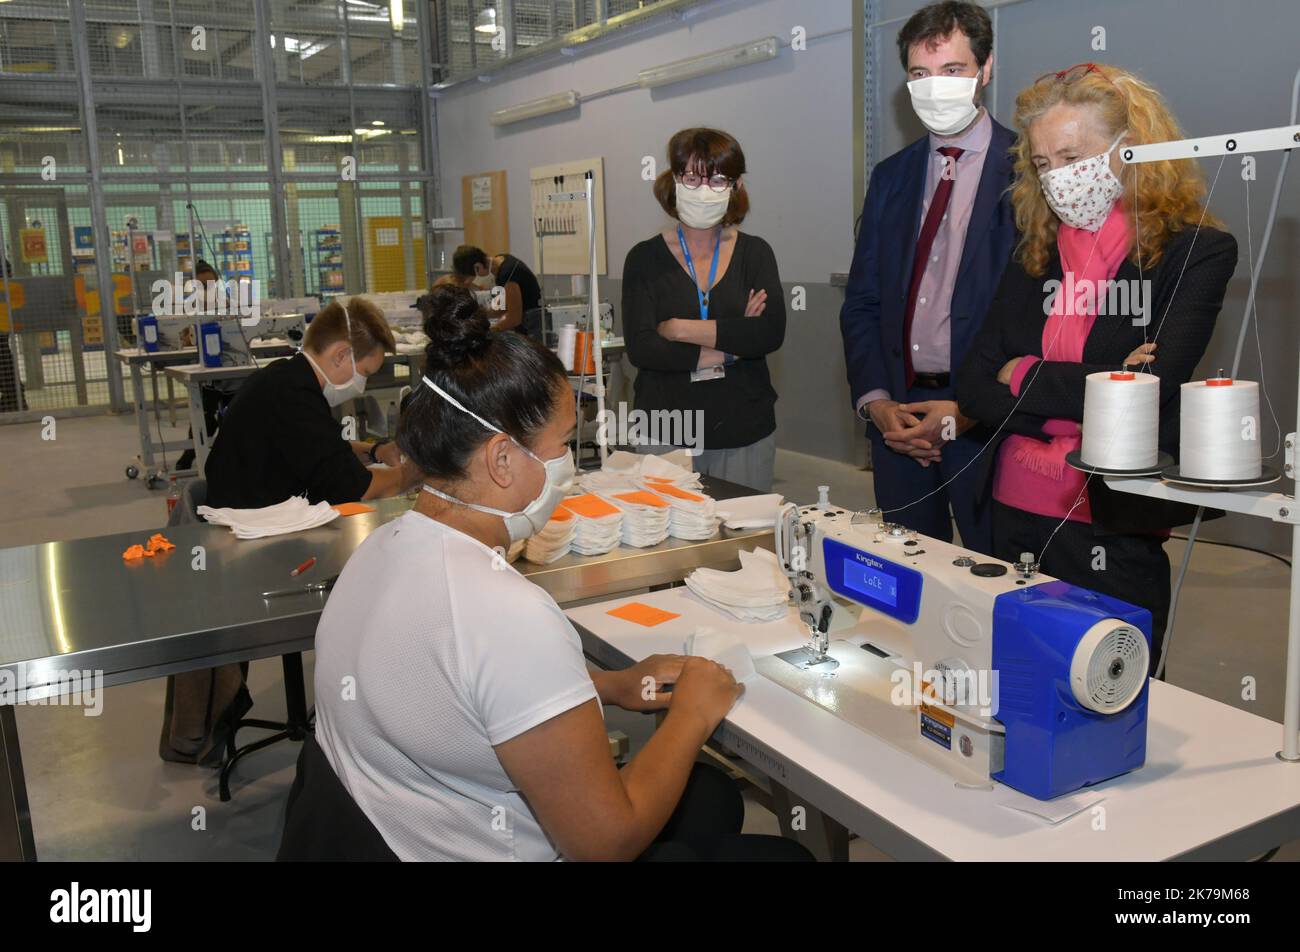 Marseille, France, may 15th 2020 - Justice minister Nicole Belloubet visits Baumettes jail. Some prisonners are sewings masks for covid-19 pandemic Stock Photo